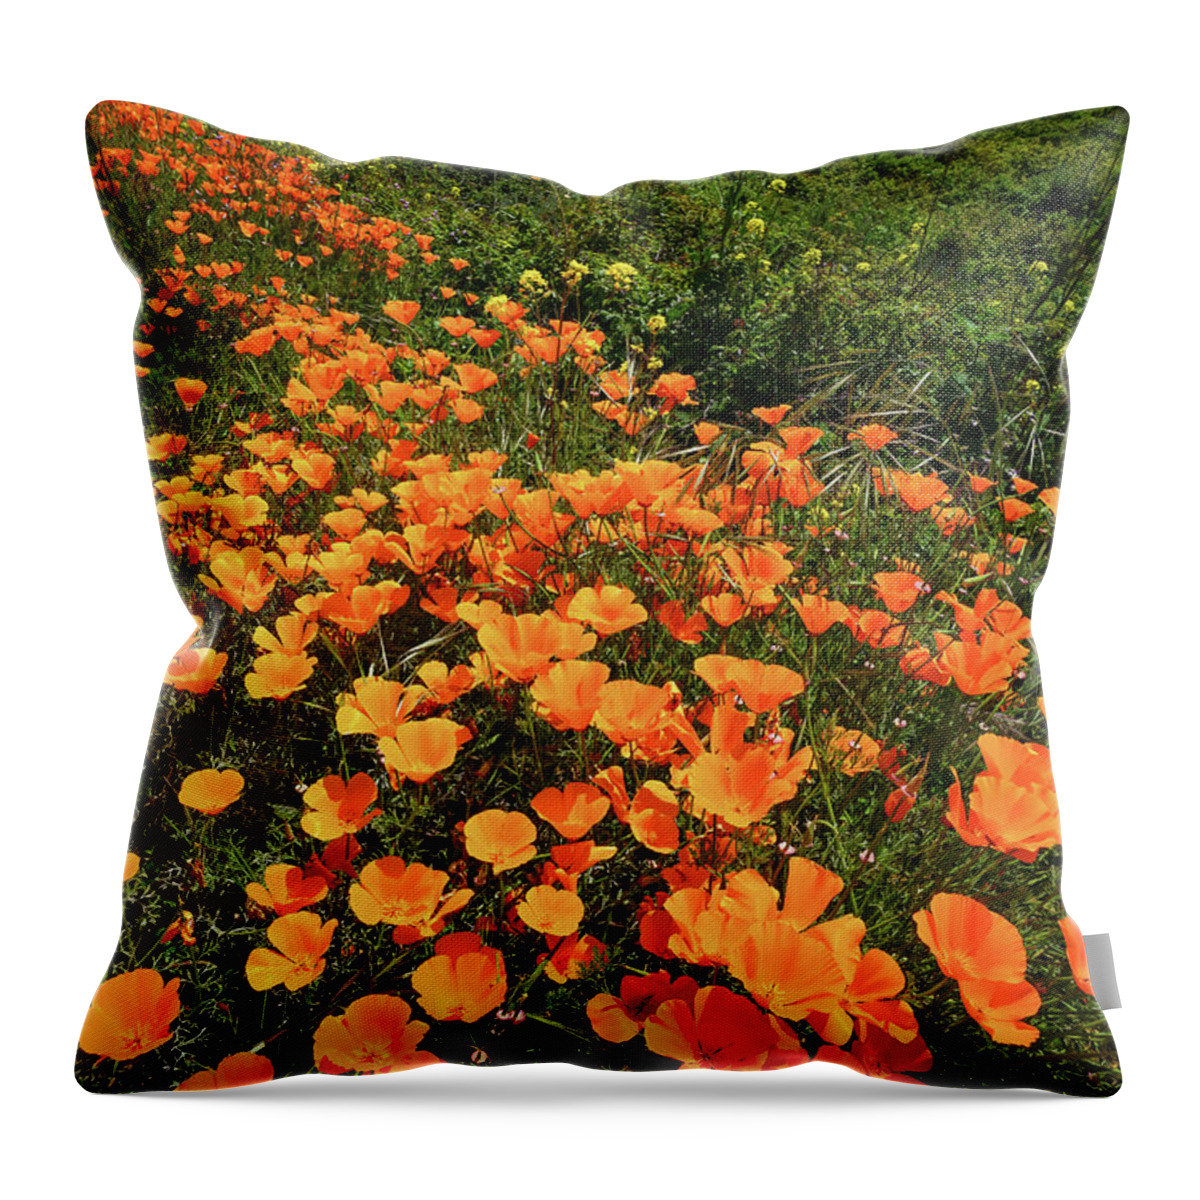 Poppies Throw Pillow featuring the photograph Central Coast Poppies by Brett Harvey